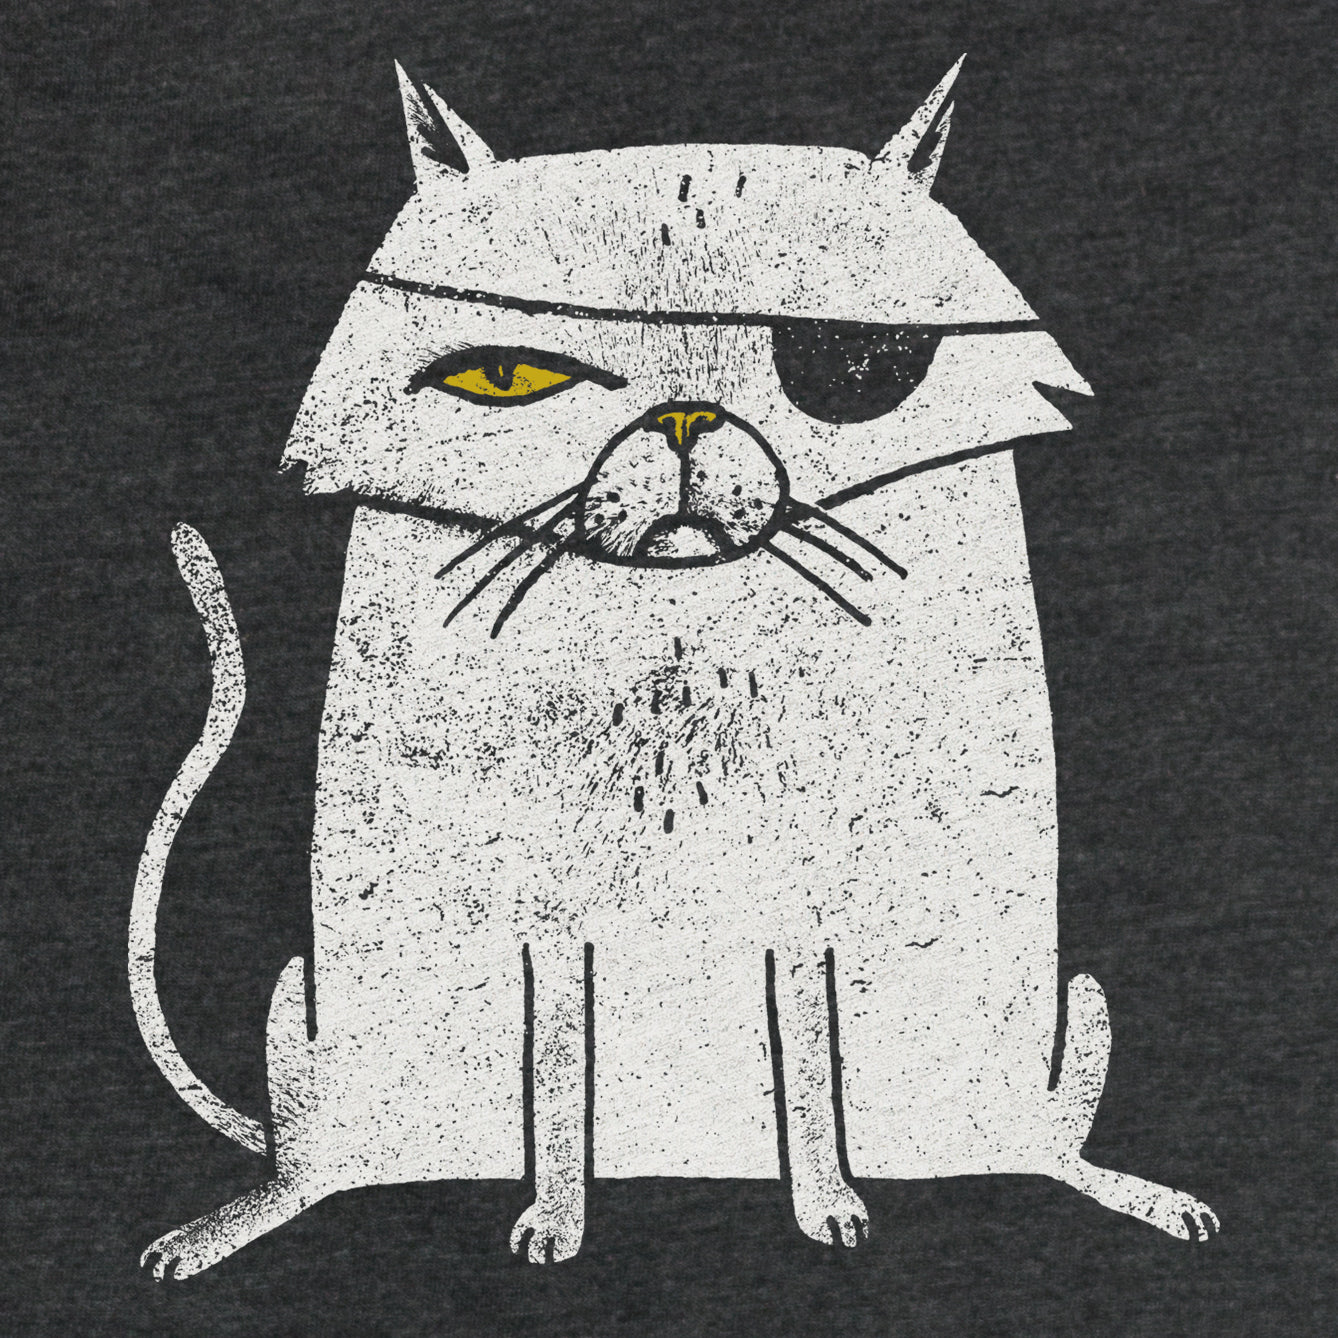 Detail of super soft gray kids/infant graphic tshirt of a one eyed cat with an eyepatch. The cat looks like a pirate or an evil Bond villian. Factory 43 is a graphic design studio that makes art with a PNW vibe that reflects their Midwest/Southern roots. This cotton/polyester/rayon shirt printed in Seattle, Washington. The cat is white with a yellow eye and nose.